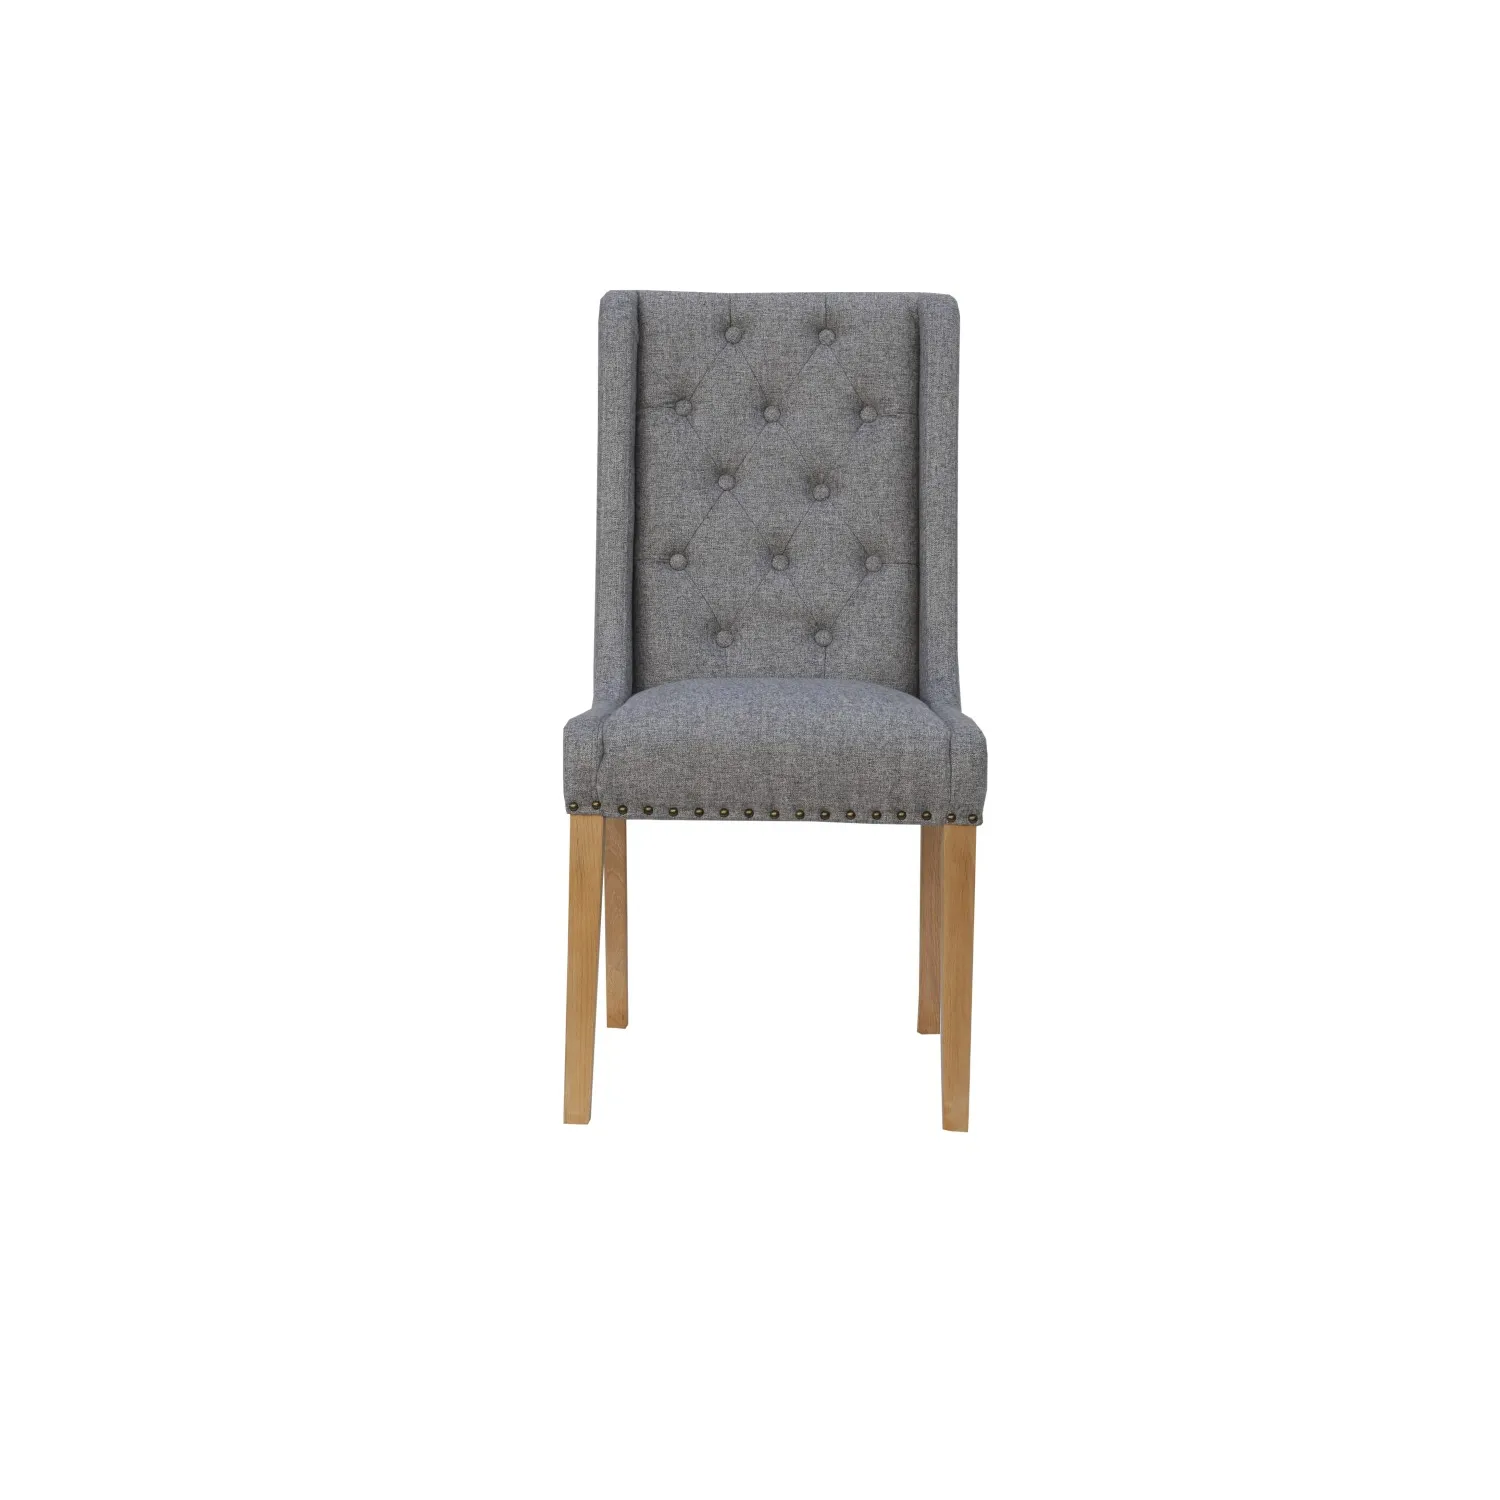 Modern Oak Wood Light Grey Fabric Upholstered Buttoned Back Dining Chair 103 x 51cm